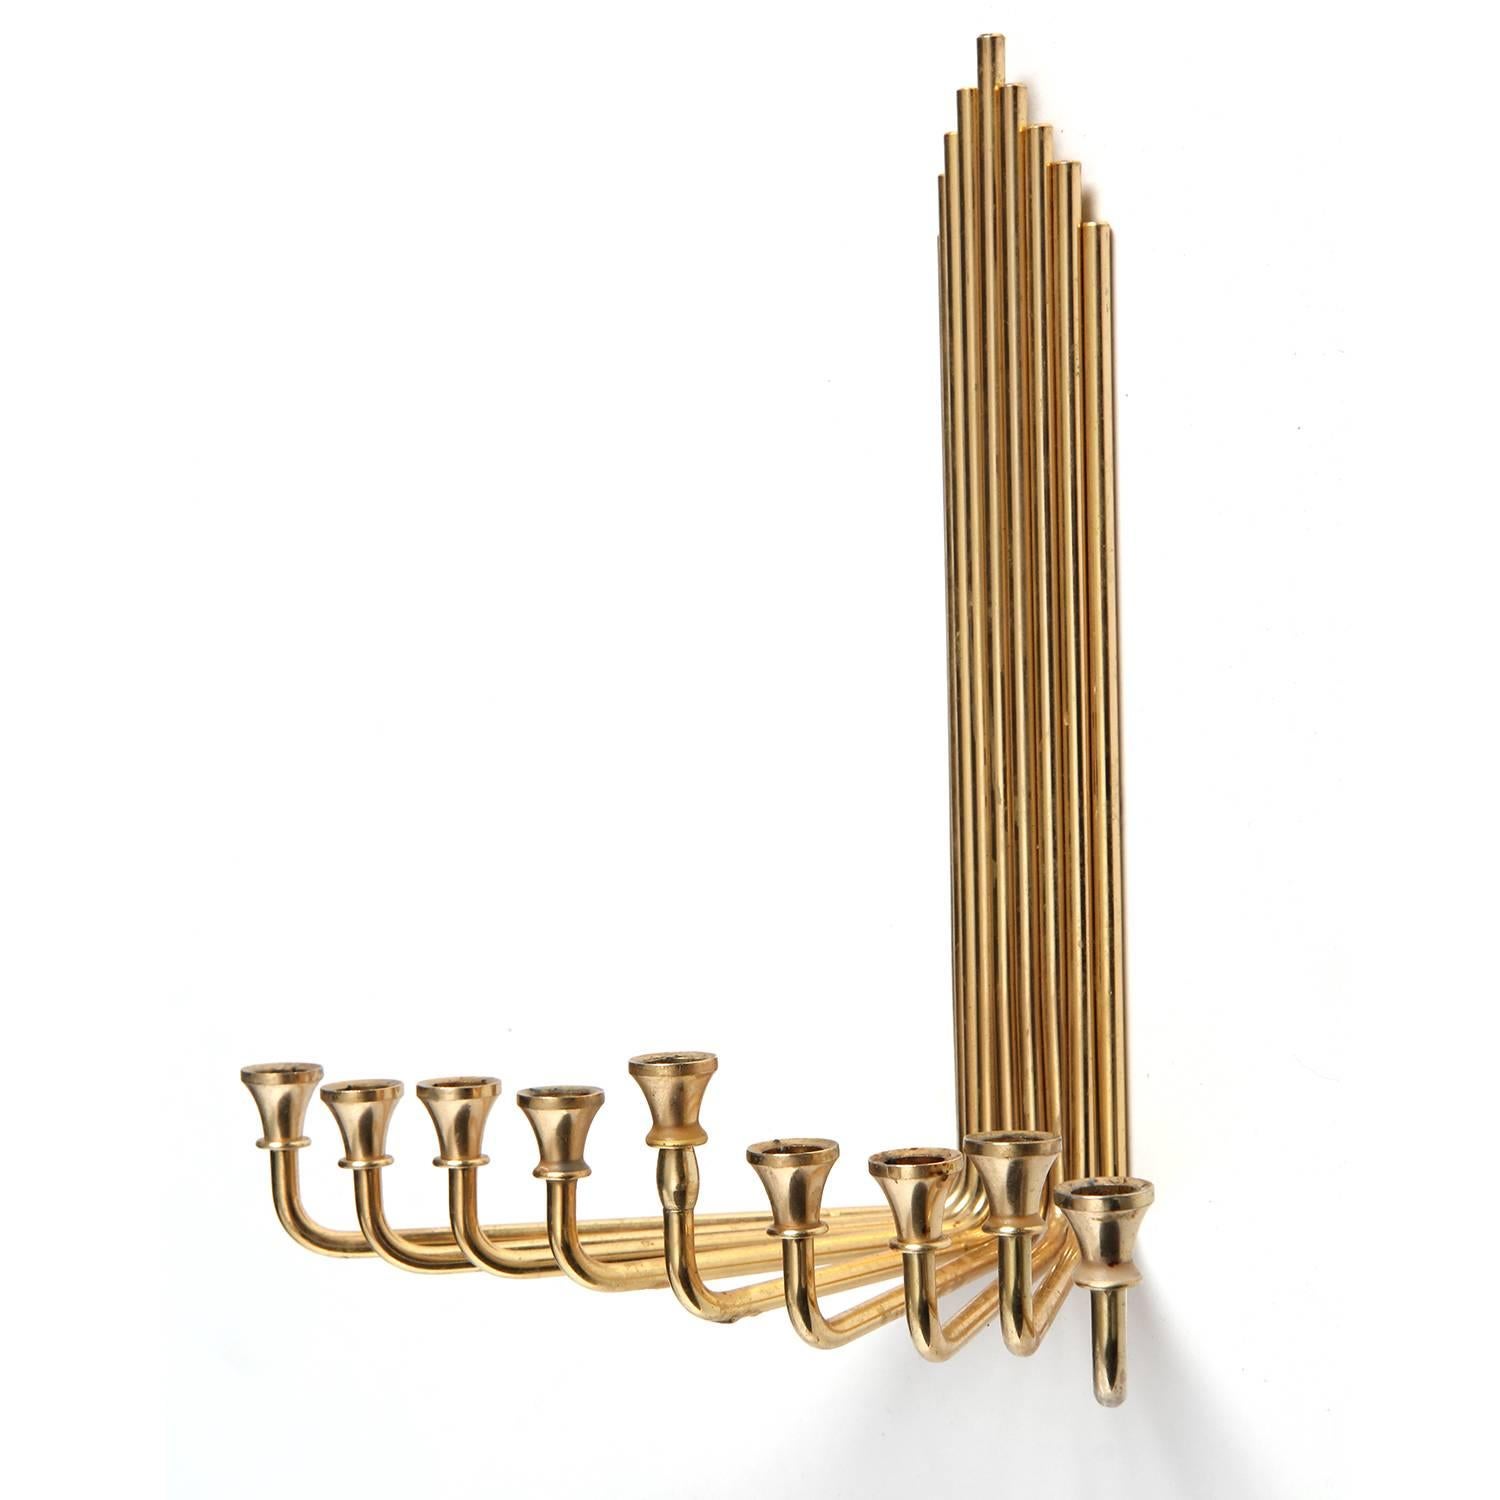 A Mid-Century Modern wall hanging menorah crafted of conjoined radiating brass plated steel rods. Made in the USA, circa 1970s.